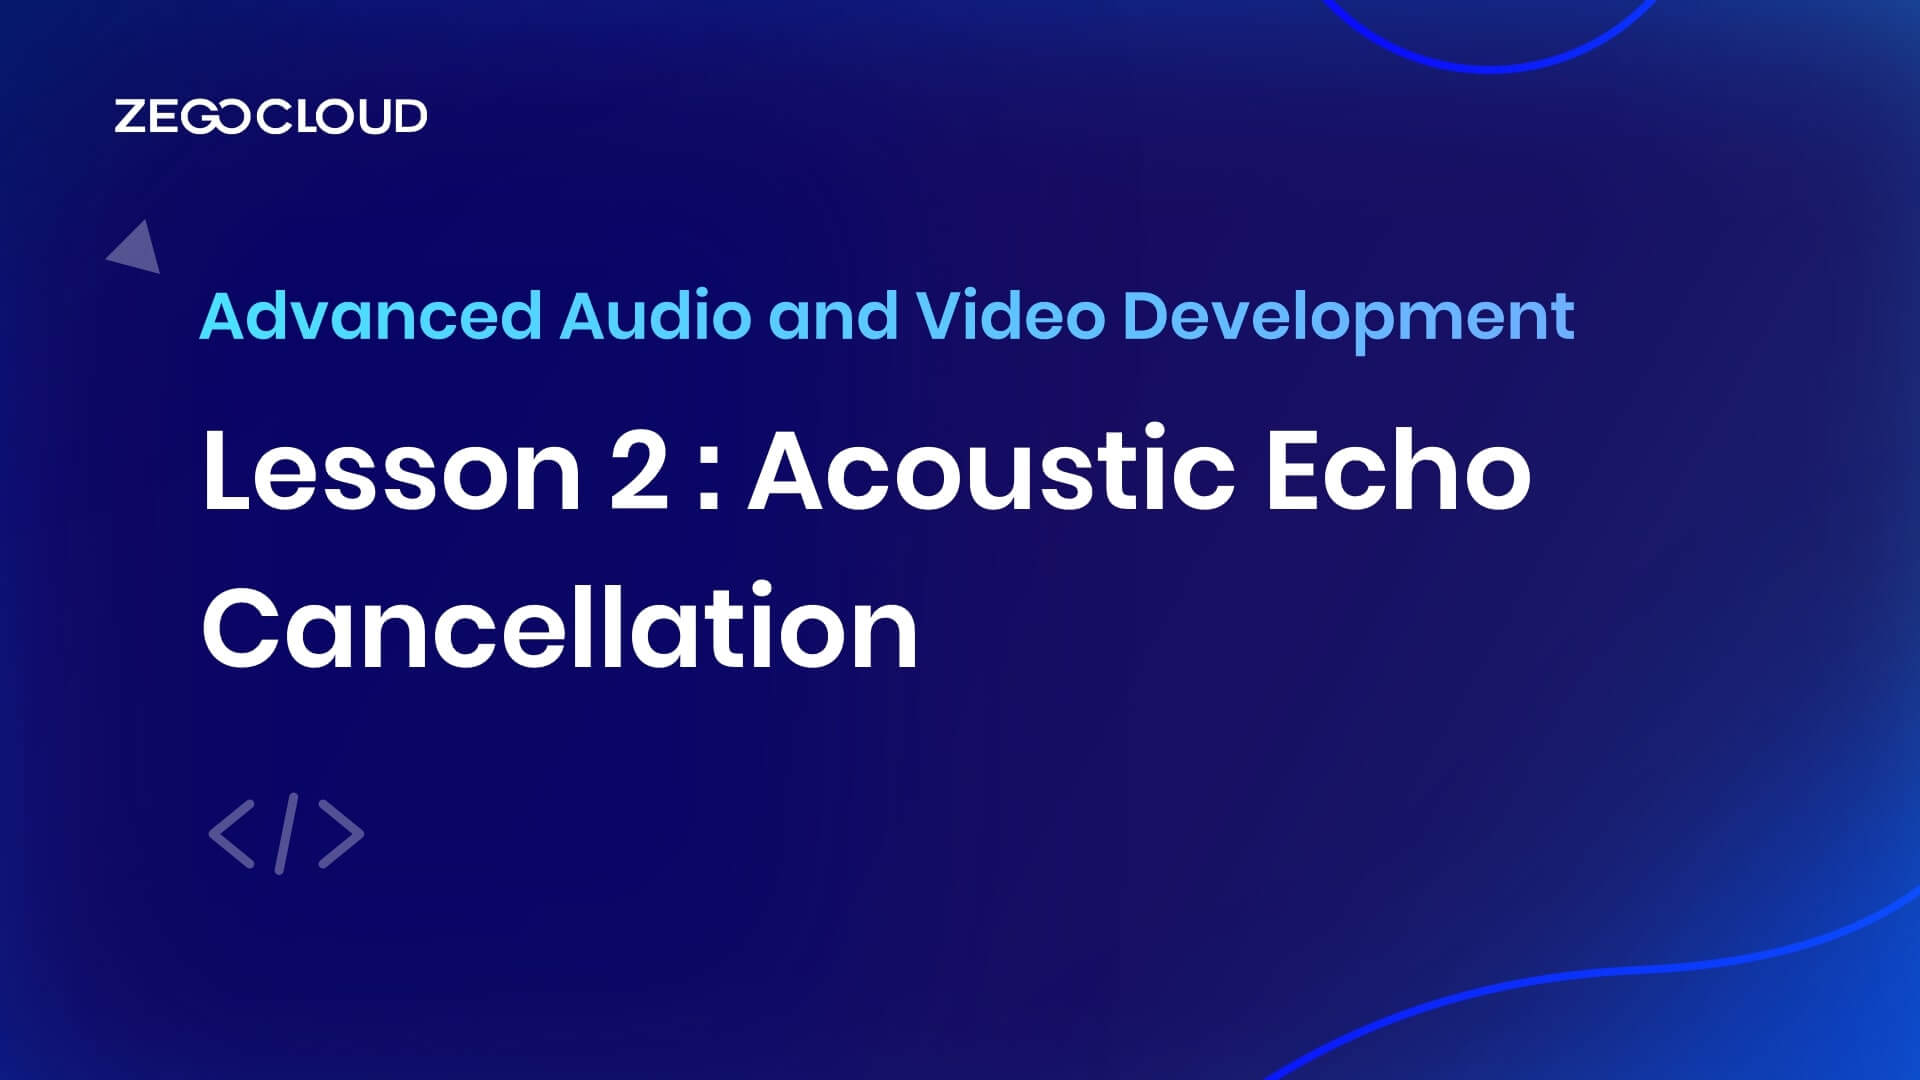 What is Acoustic Echo Cancellation